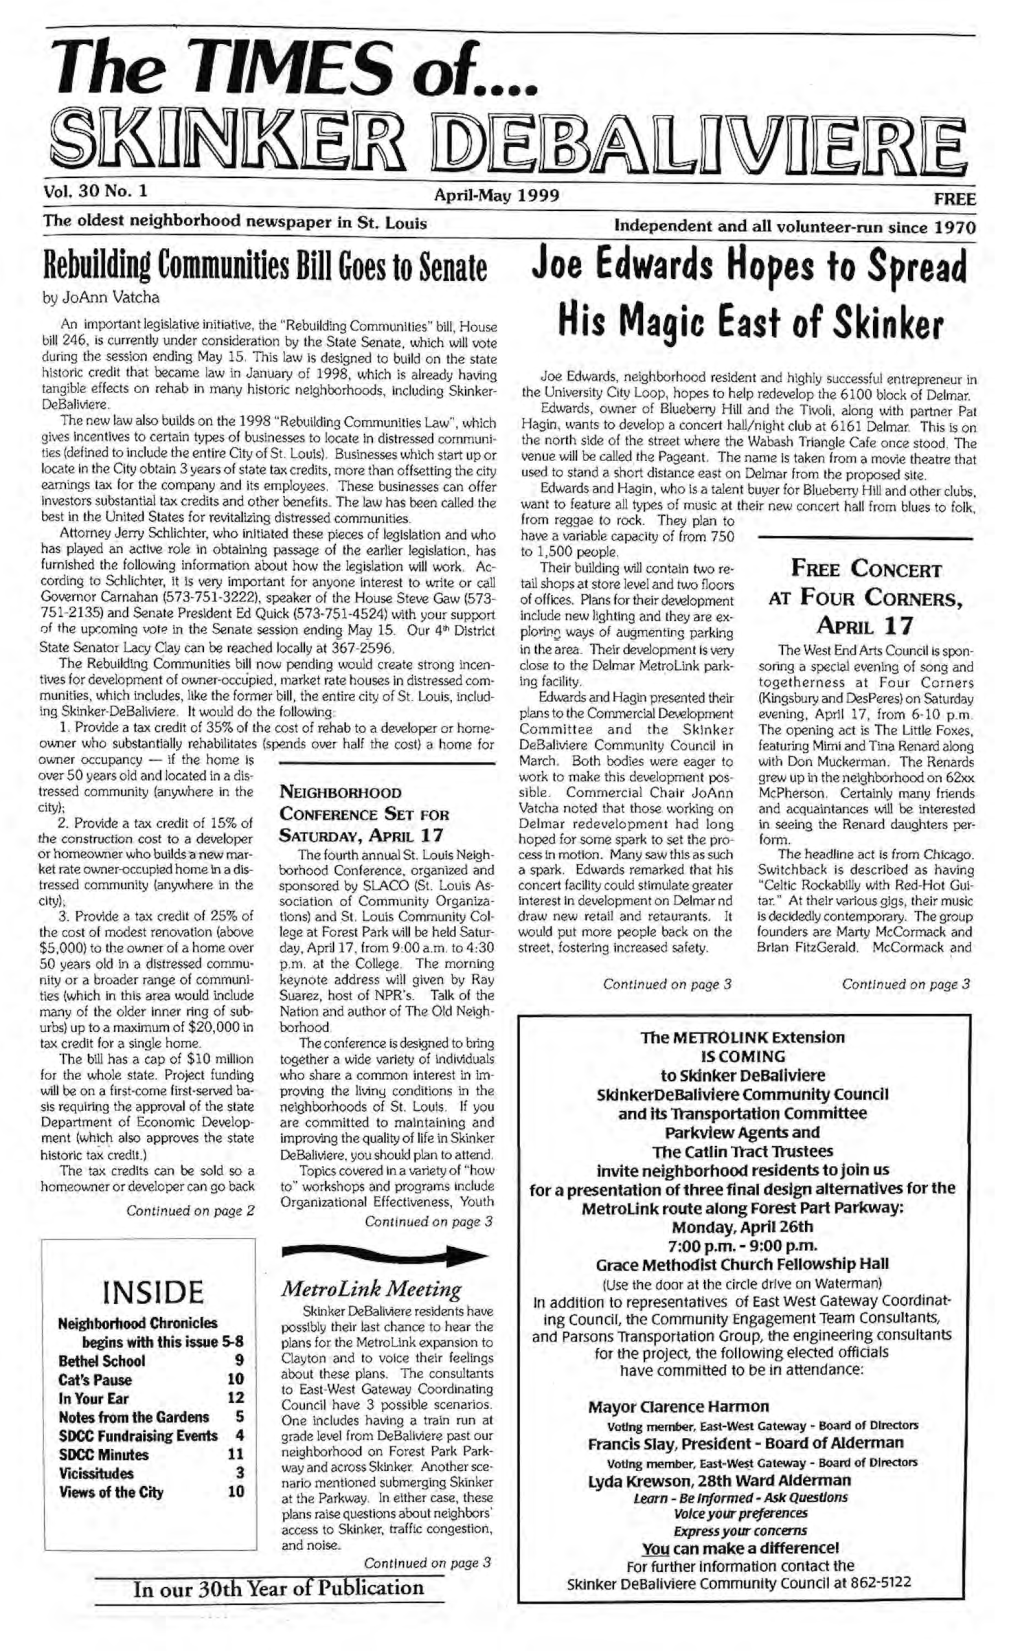 The Times of Skinker Debaliviere April-May 1999